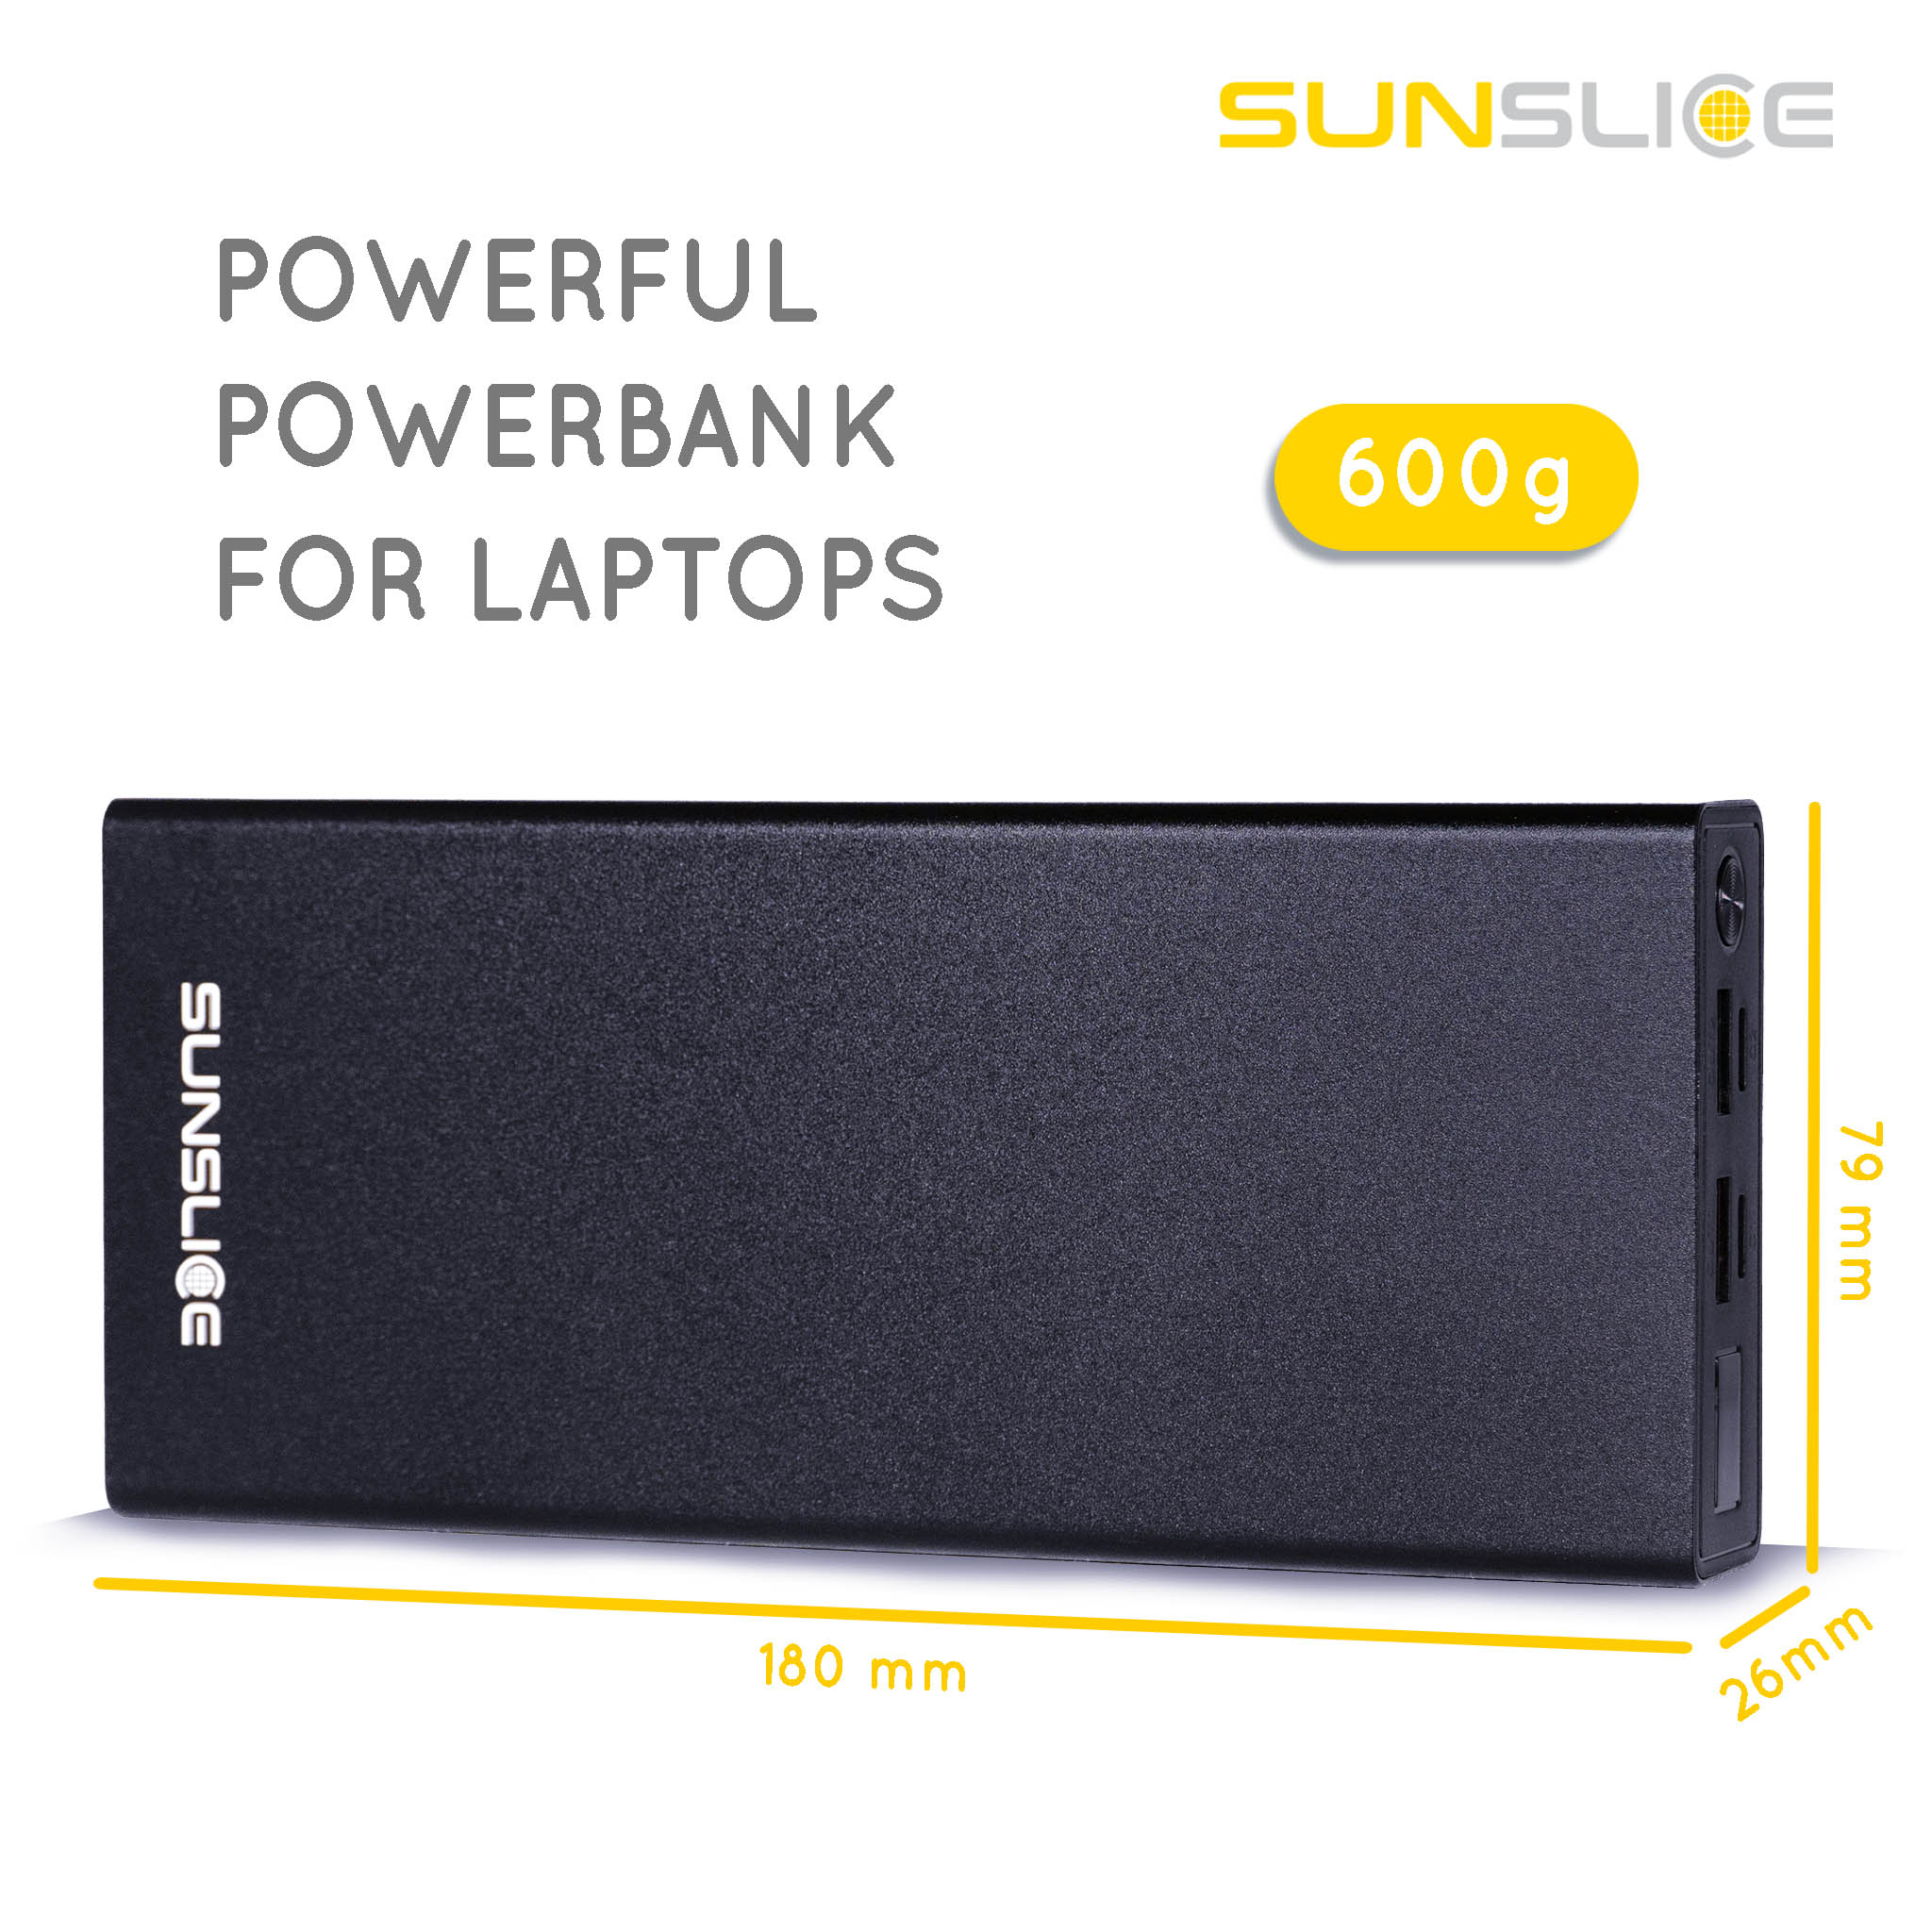 Power bank Gravity 27 size informations: 180 mm, 79 mm, 26 mm. Weight: 600g Powerful power bank for laptop